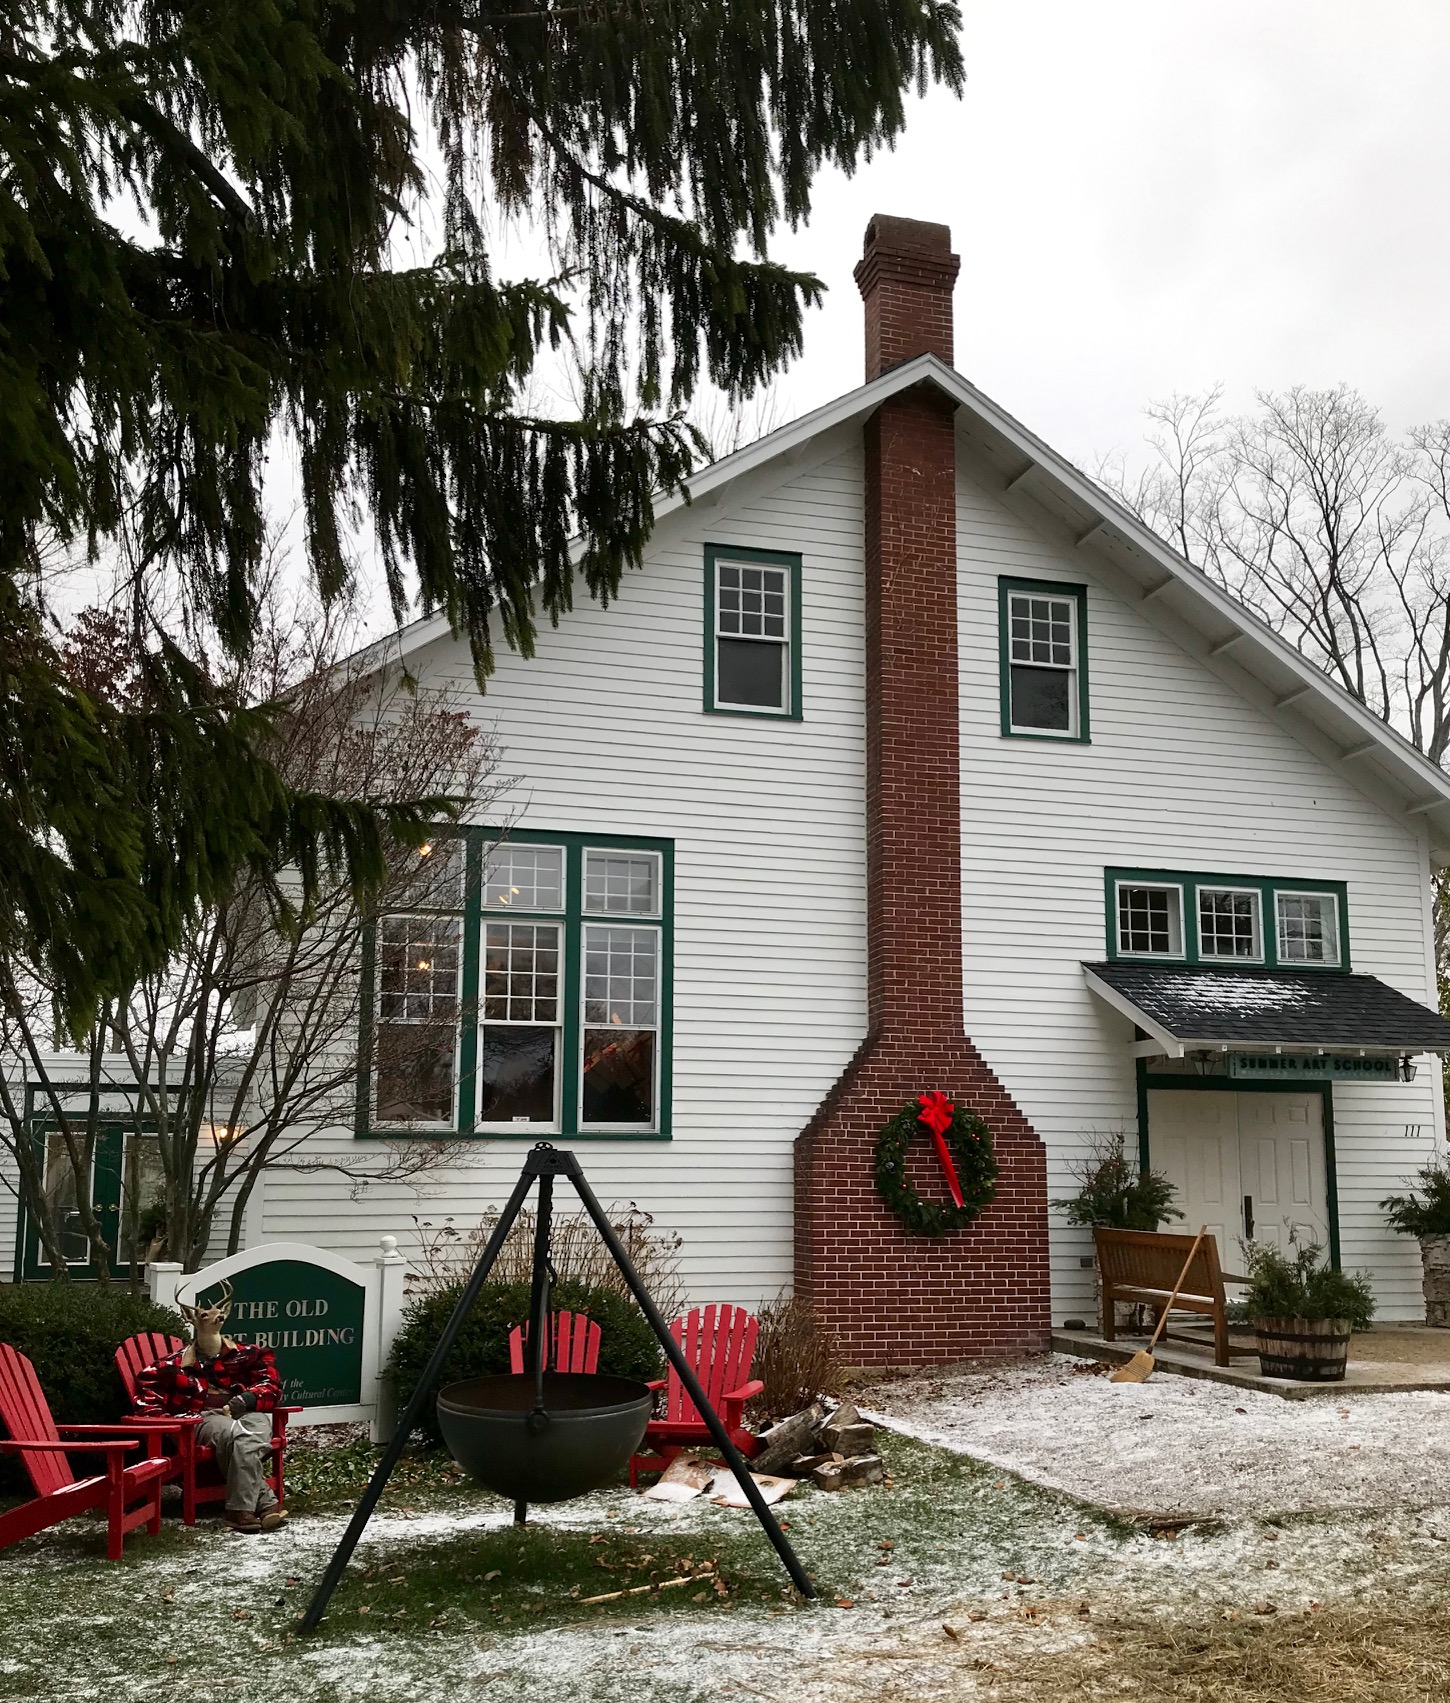 side view of a colonial building/house. Brick chiminey in the milddle, with Christmast wreath. Red adirondak chairs around cauldron fire pit.